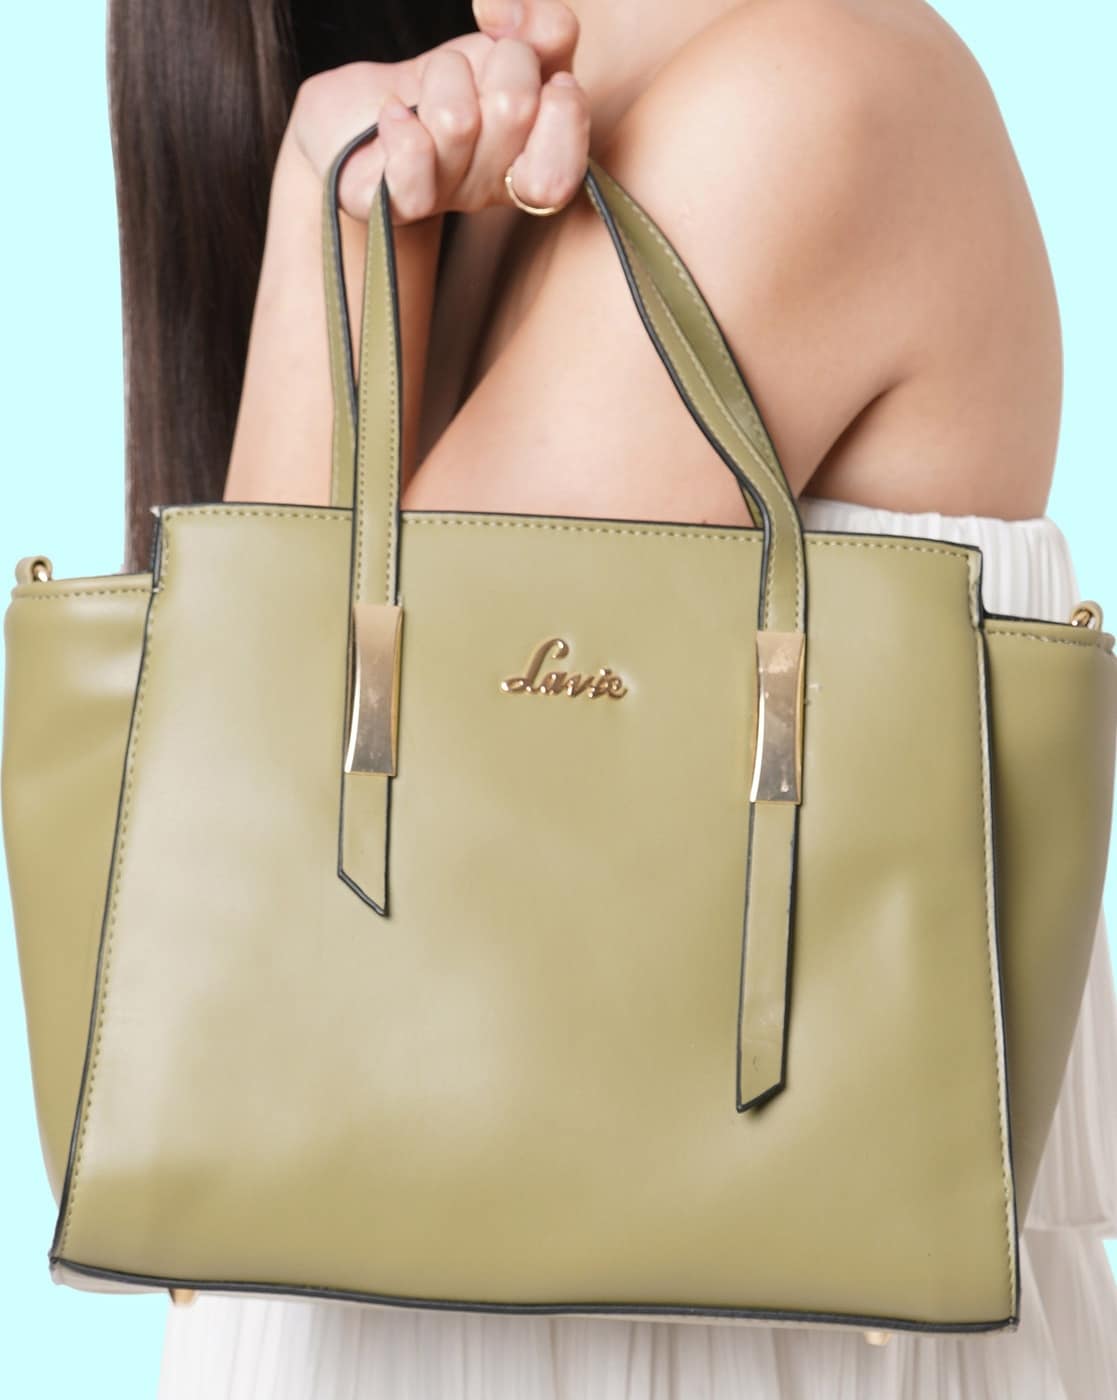 Lavie Sale: Designer Bags, Fashion Bags and Shoes (Min 50% OFF)